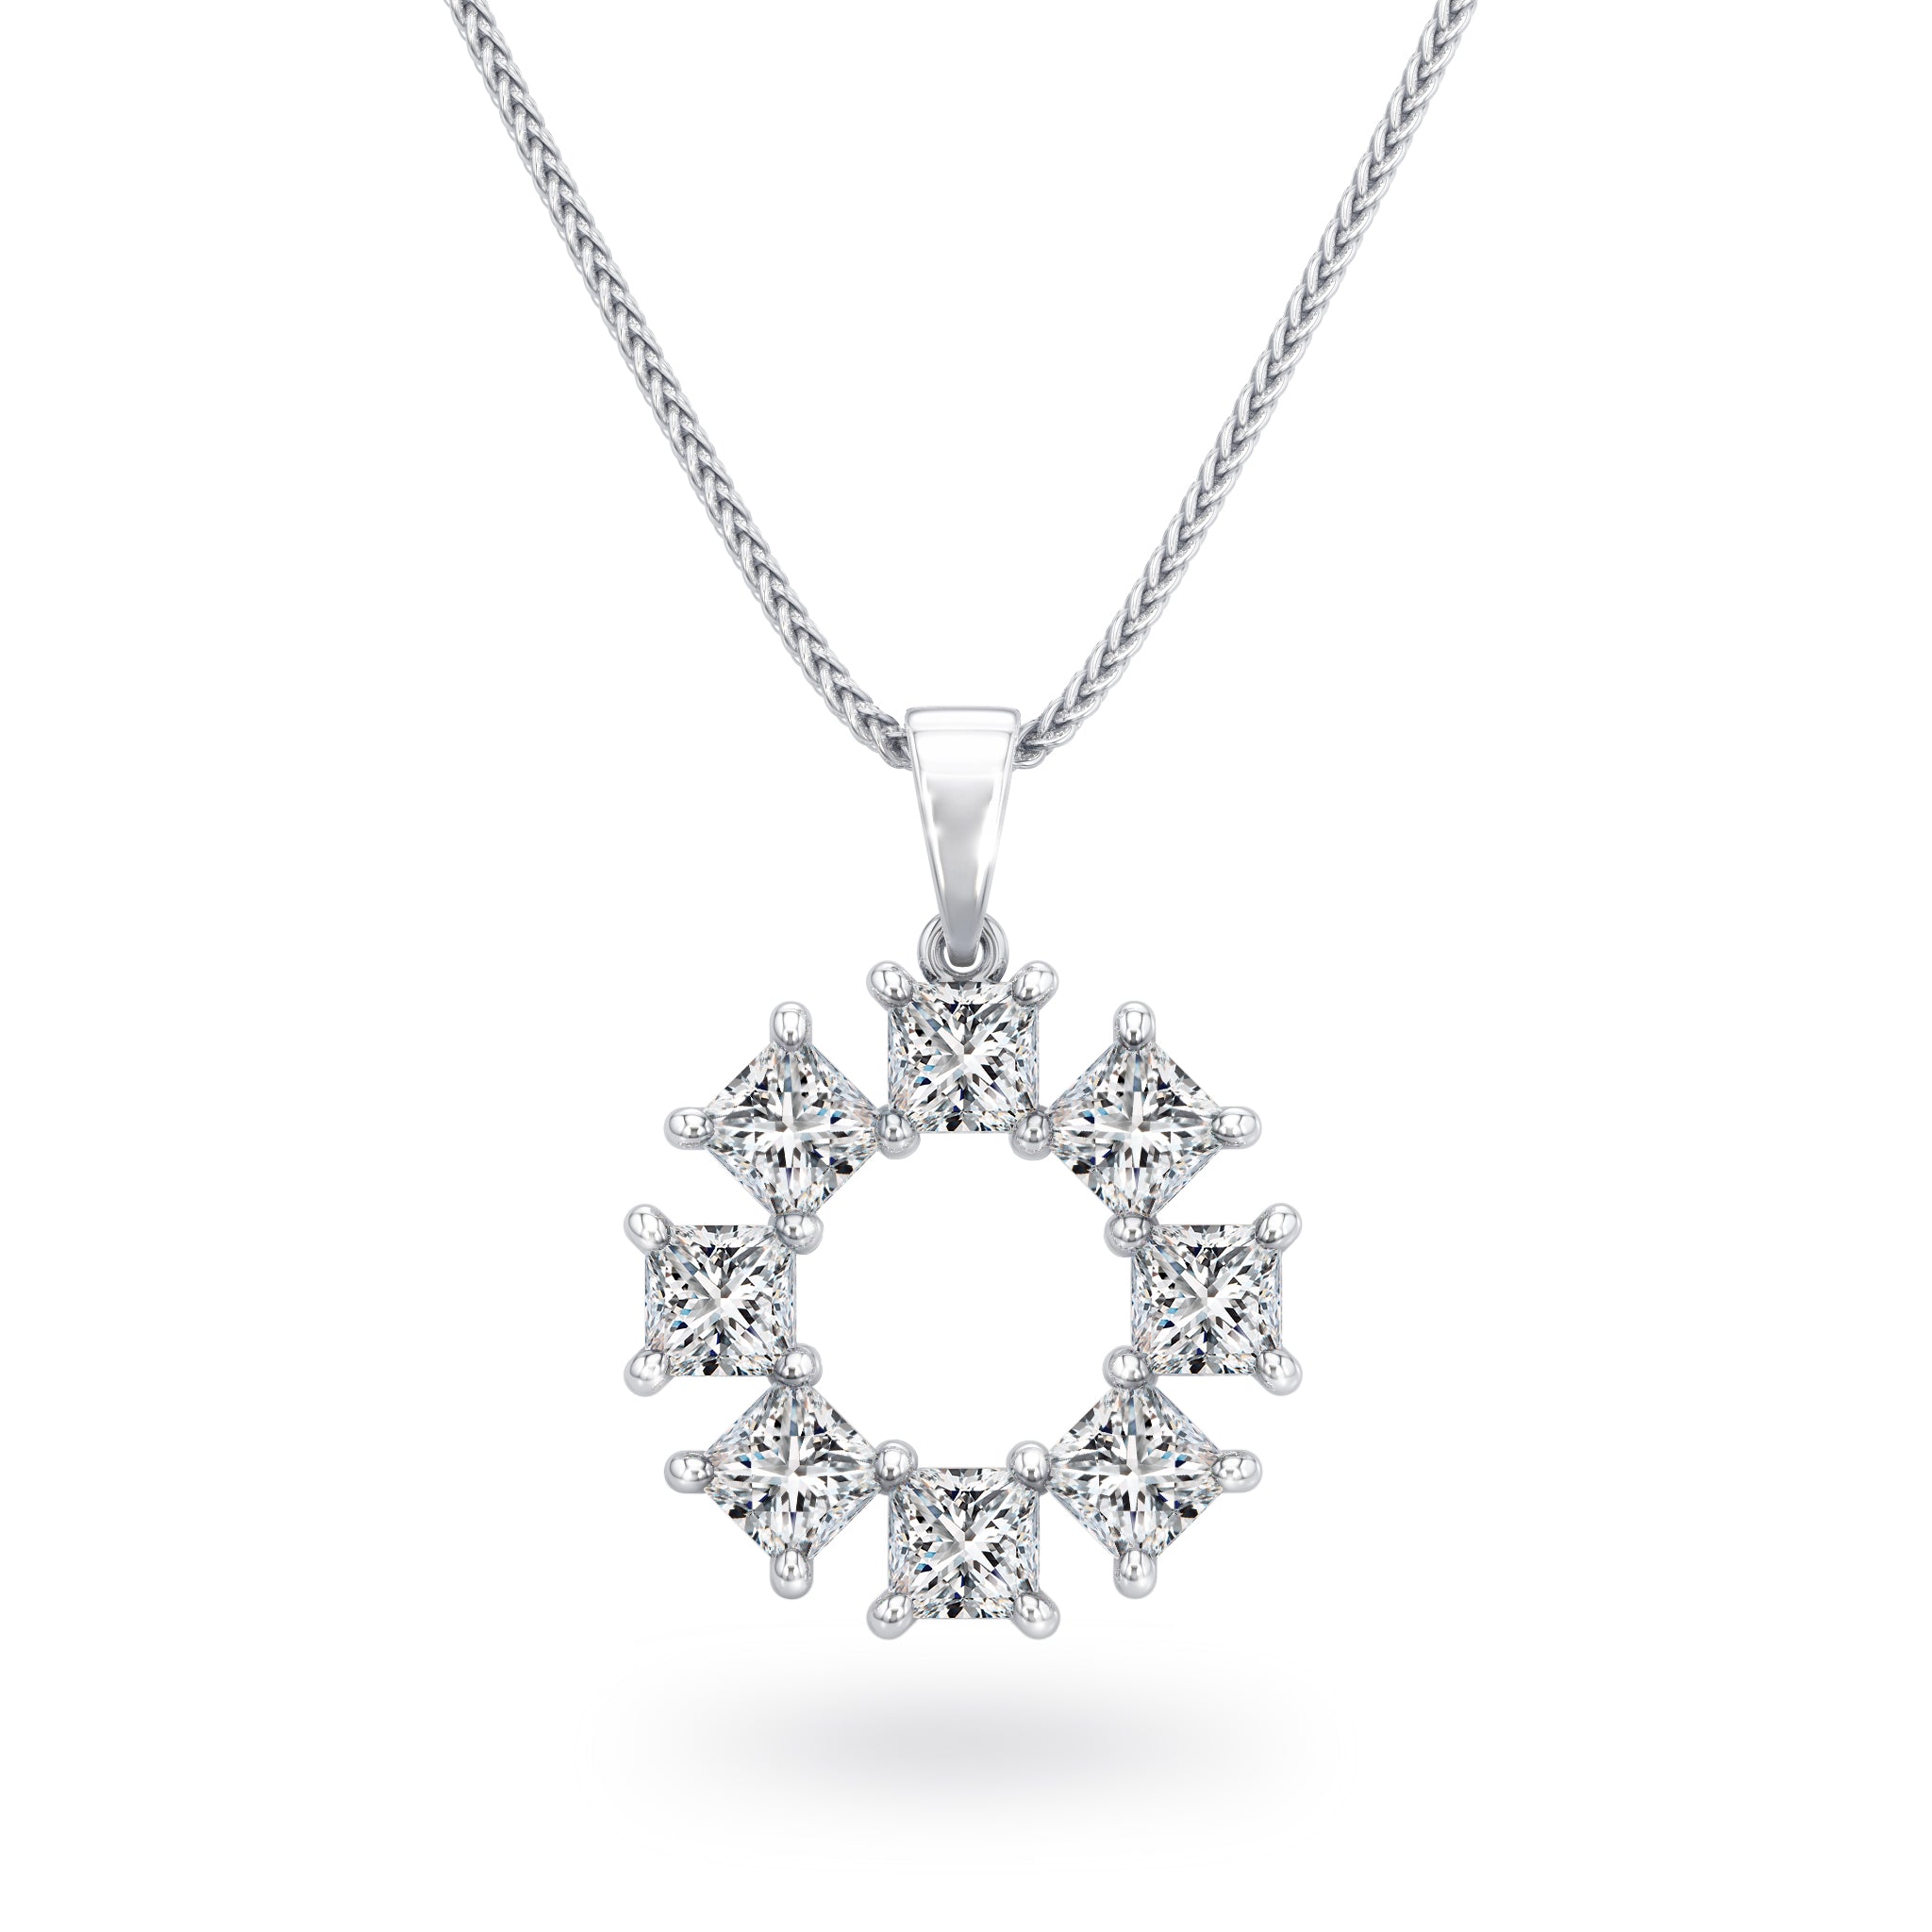 Shimansky - My Girl Lucky 8 Diamond Pendant 1.00ct Crafted in 18K White Gold